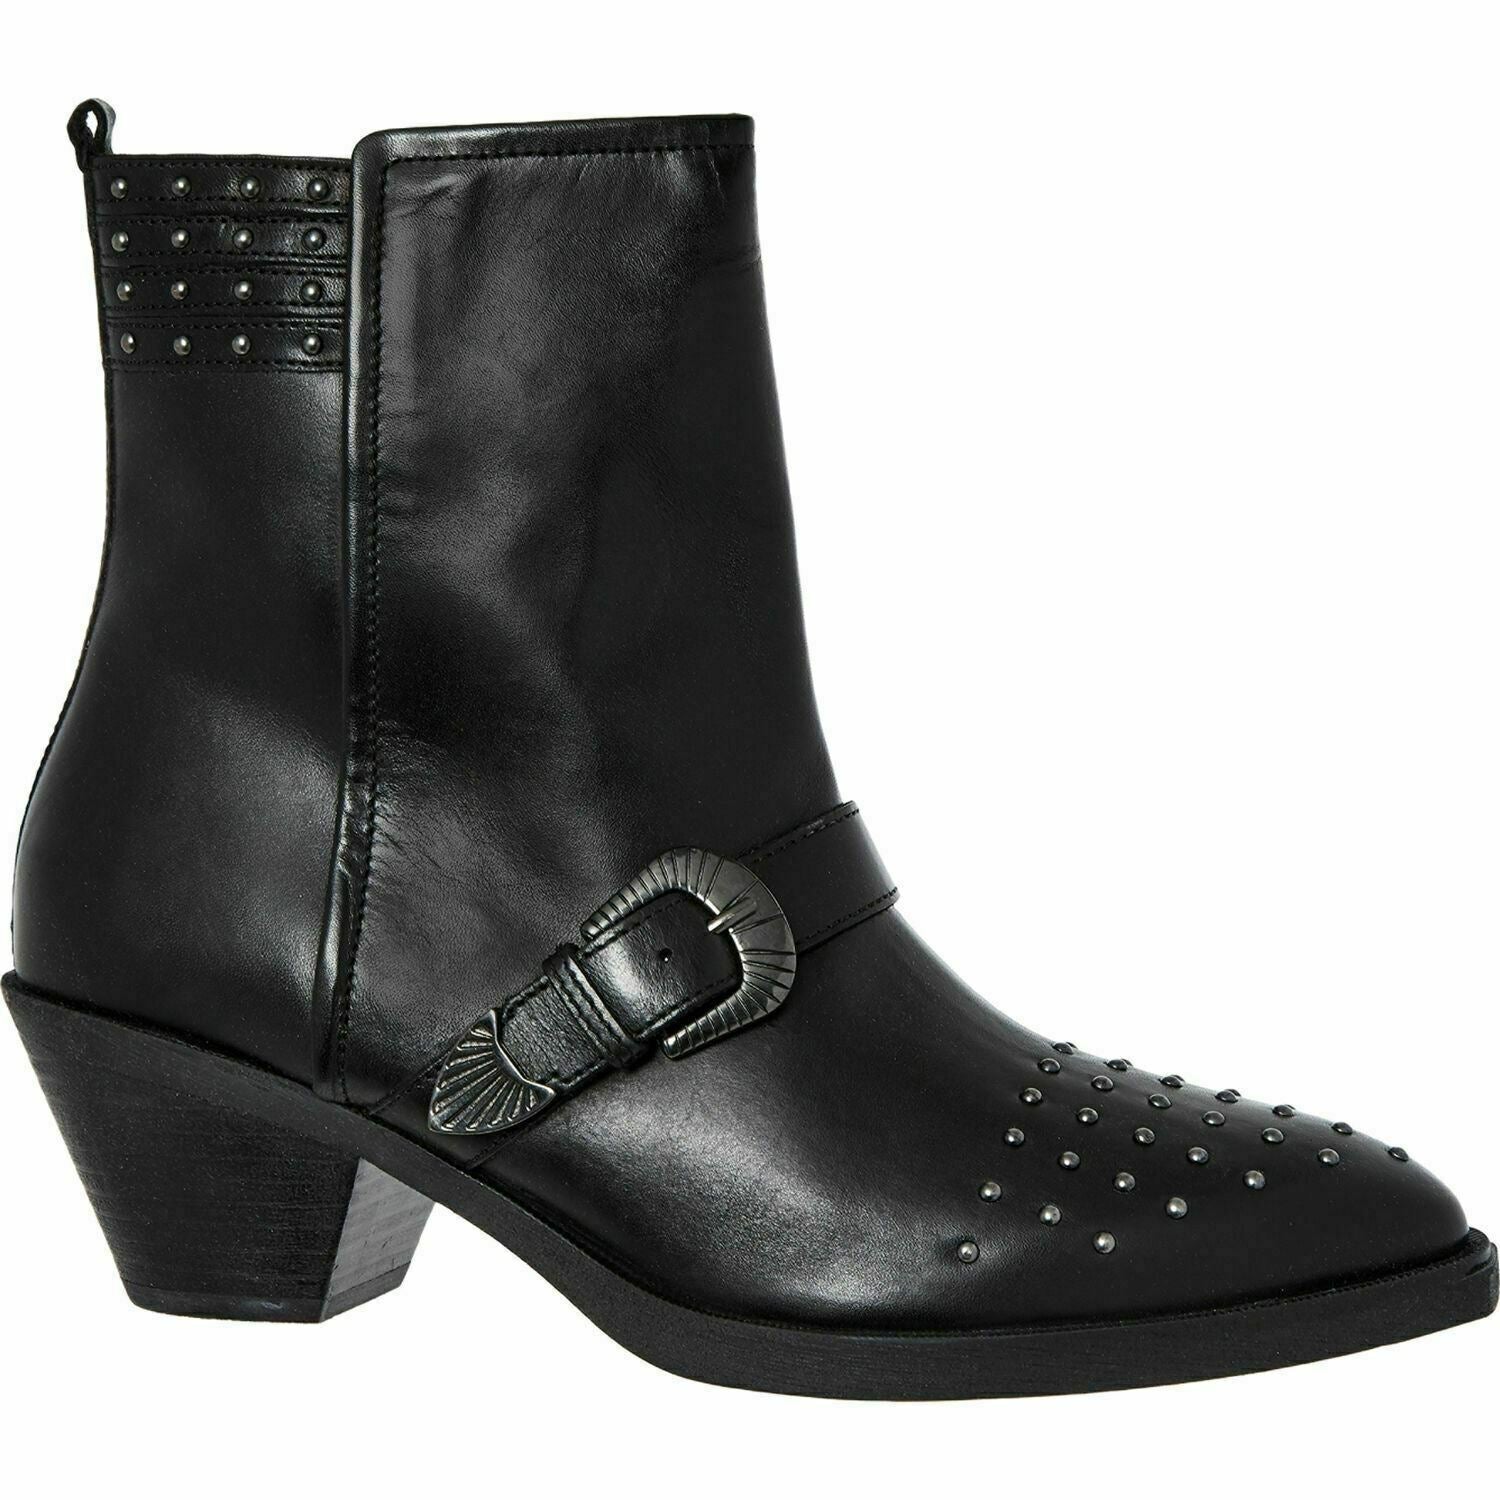 GEOX Women's LOVAI Western Style Leather Ankle Boots, Black, UK 3.5 / EU 36.5